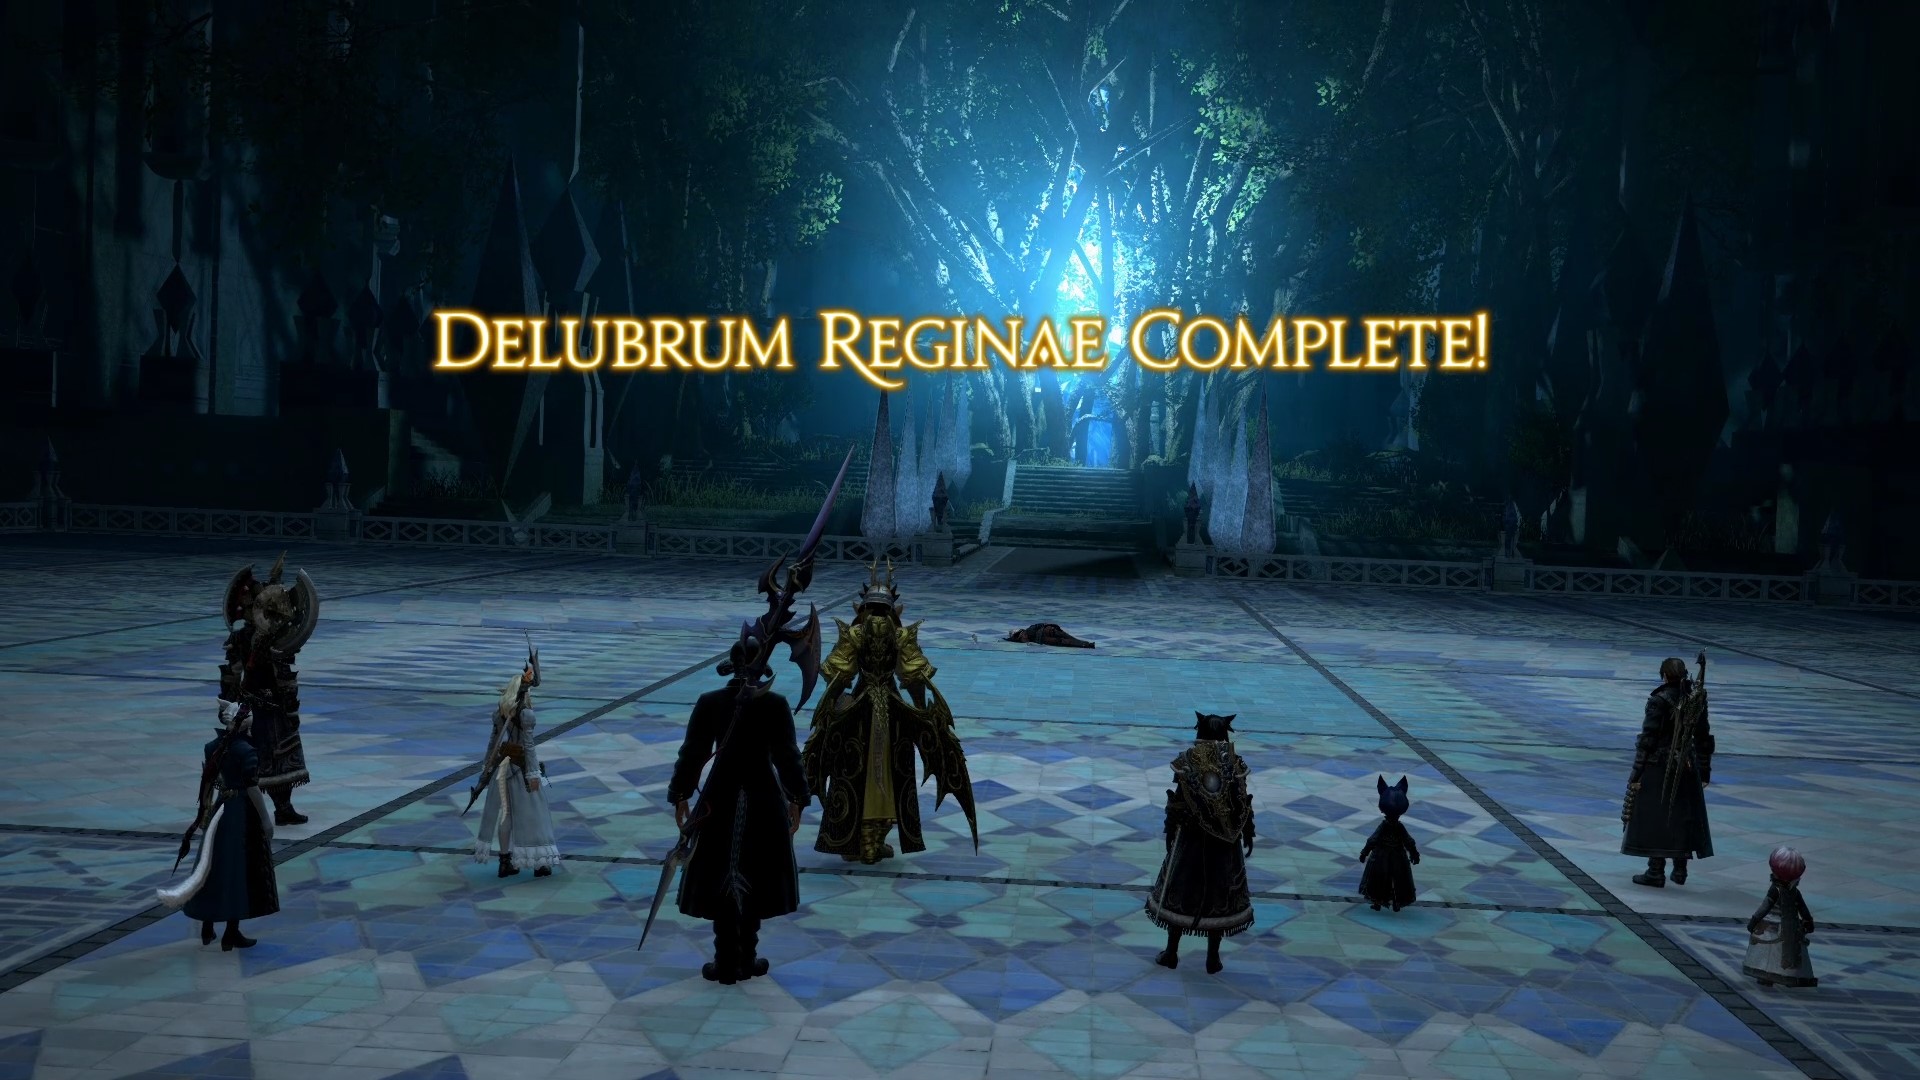 Delubrum Reginae complete. Congrats on the clear!